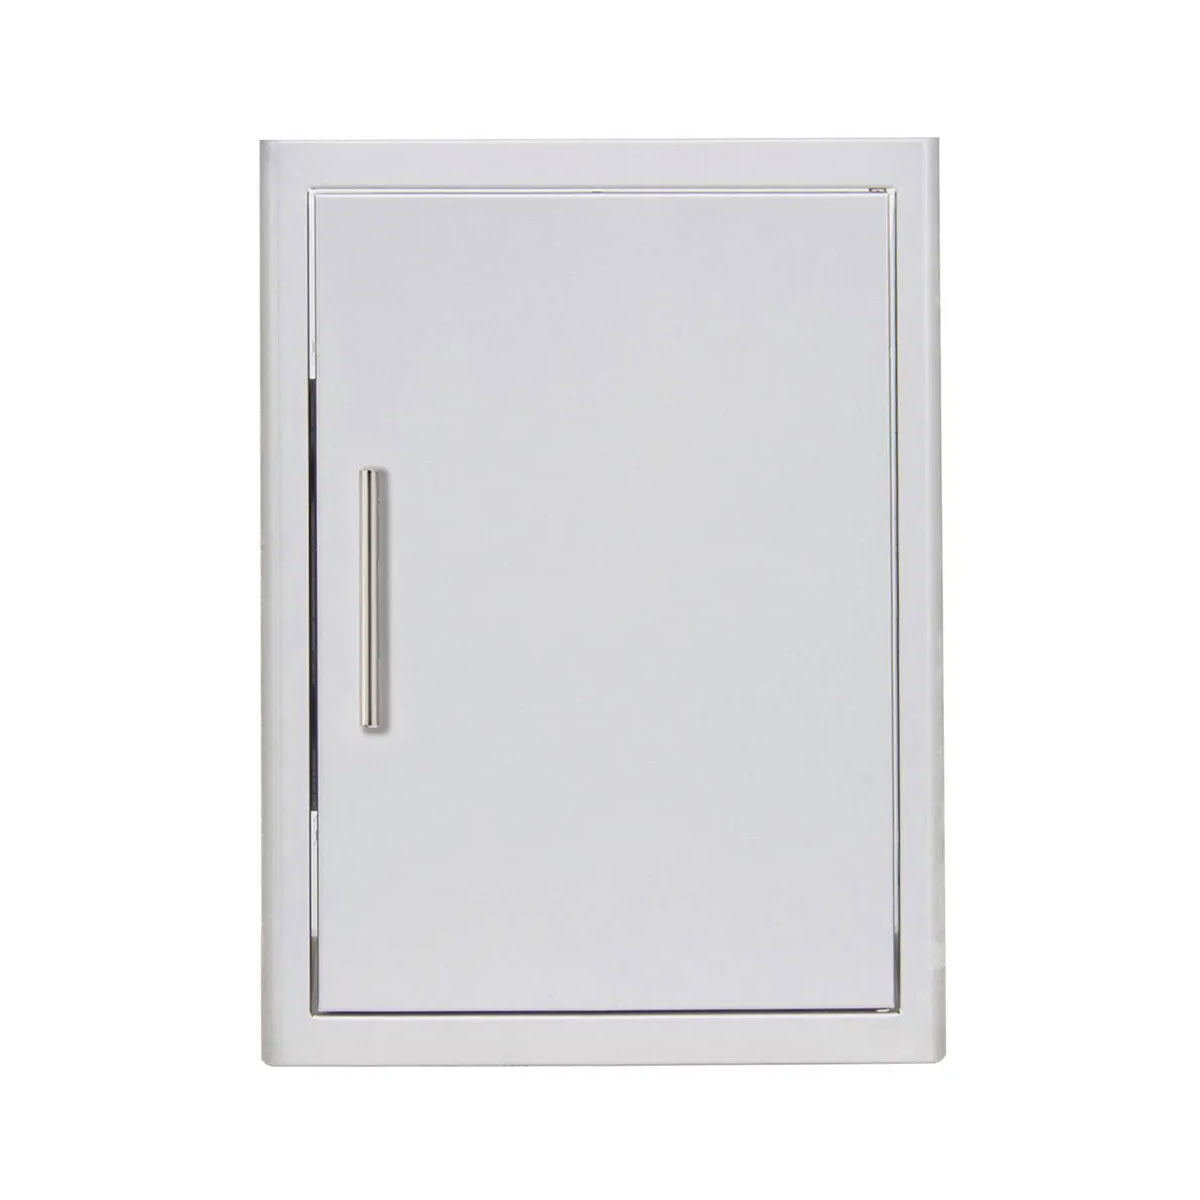 21" Single Access Right-Hinged Door with Soft Close Hinges - BLZ-SINGLE-2417-R-SC